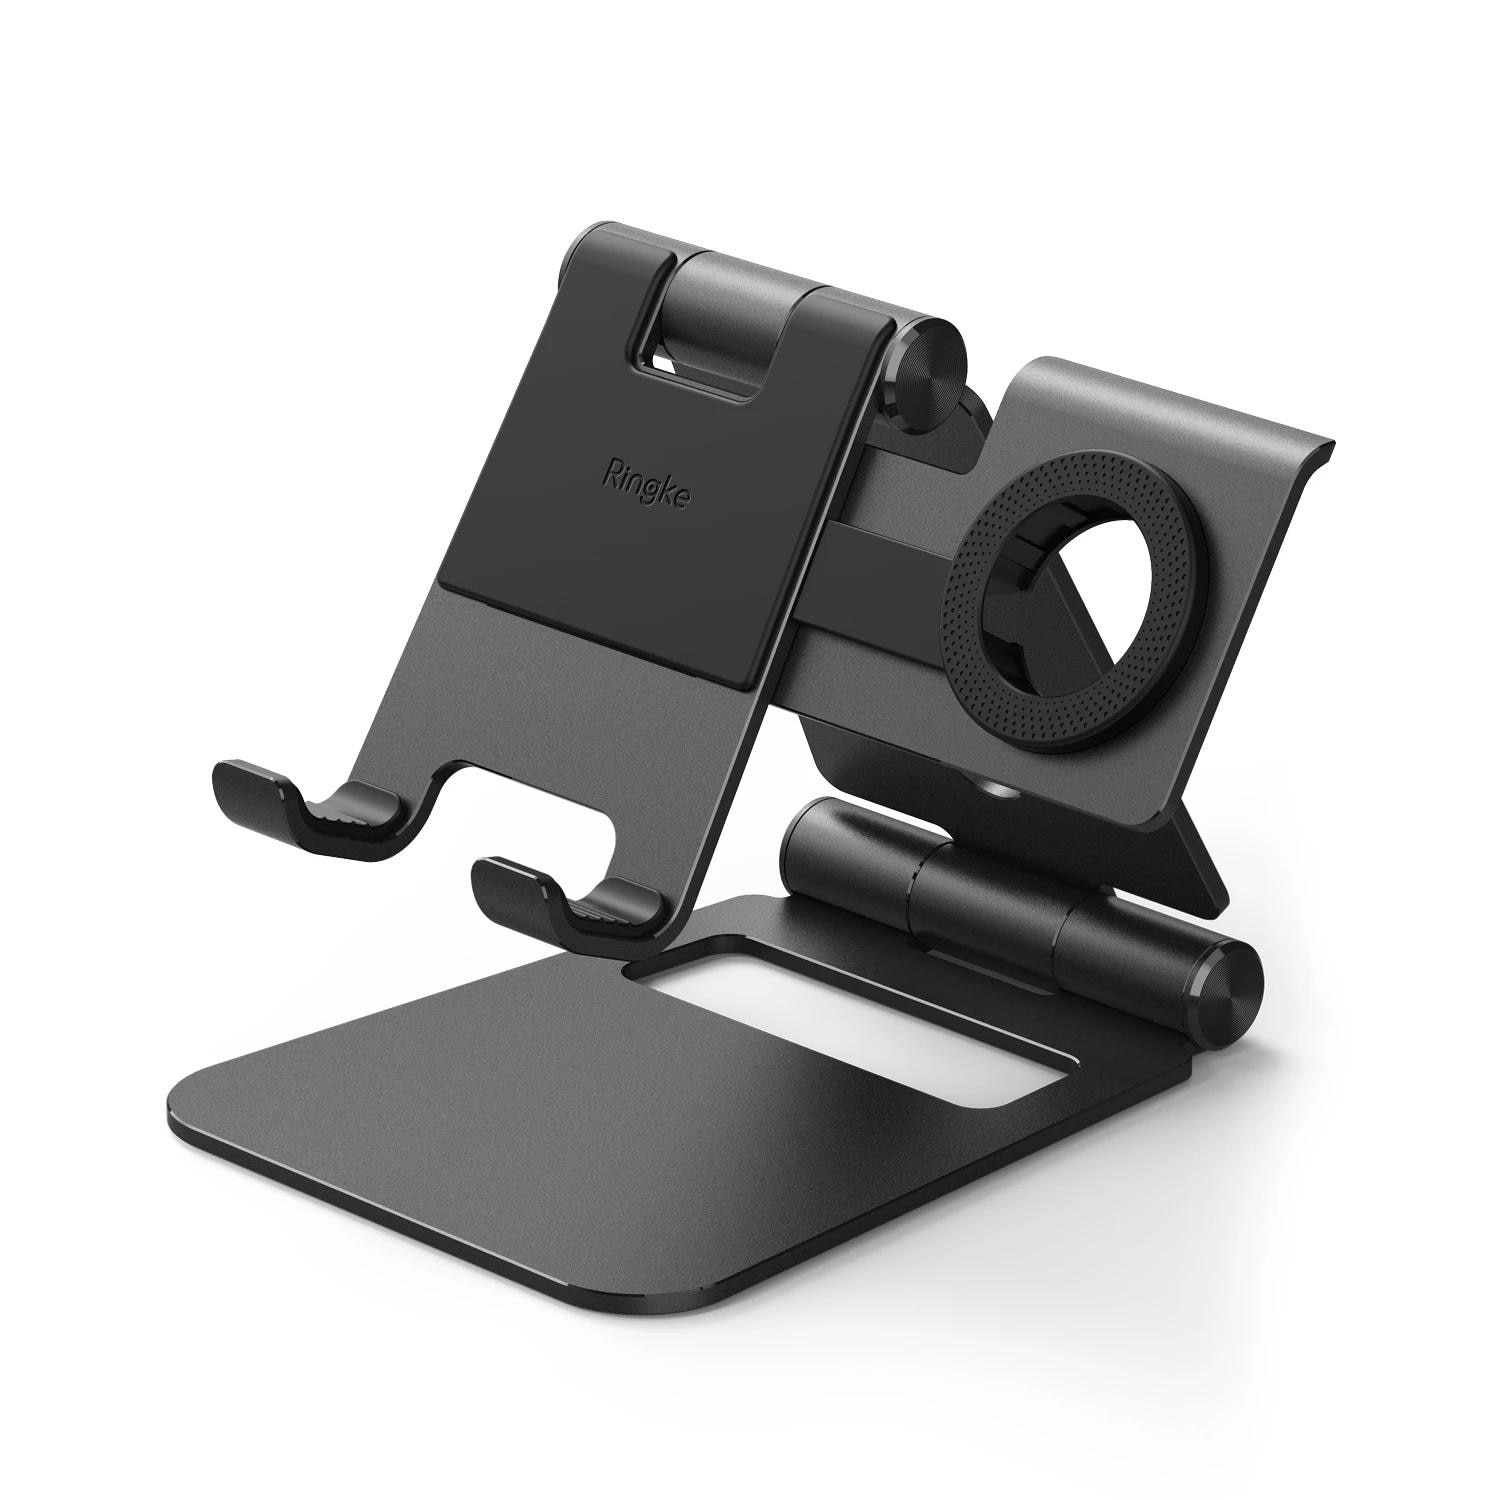 Super Folding Stand for iPhone & Apple Watch